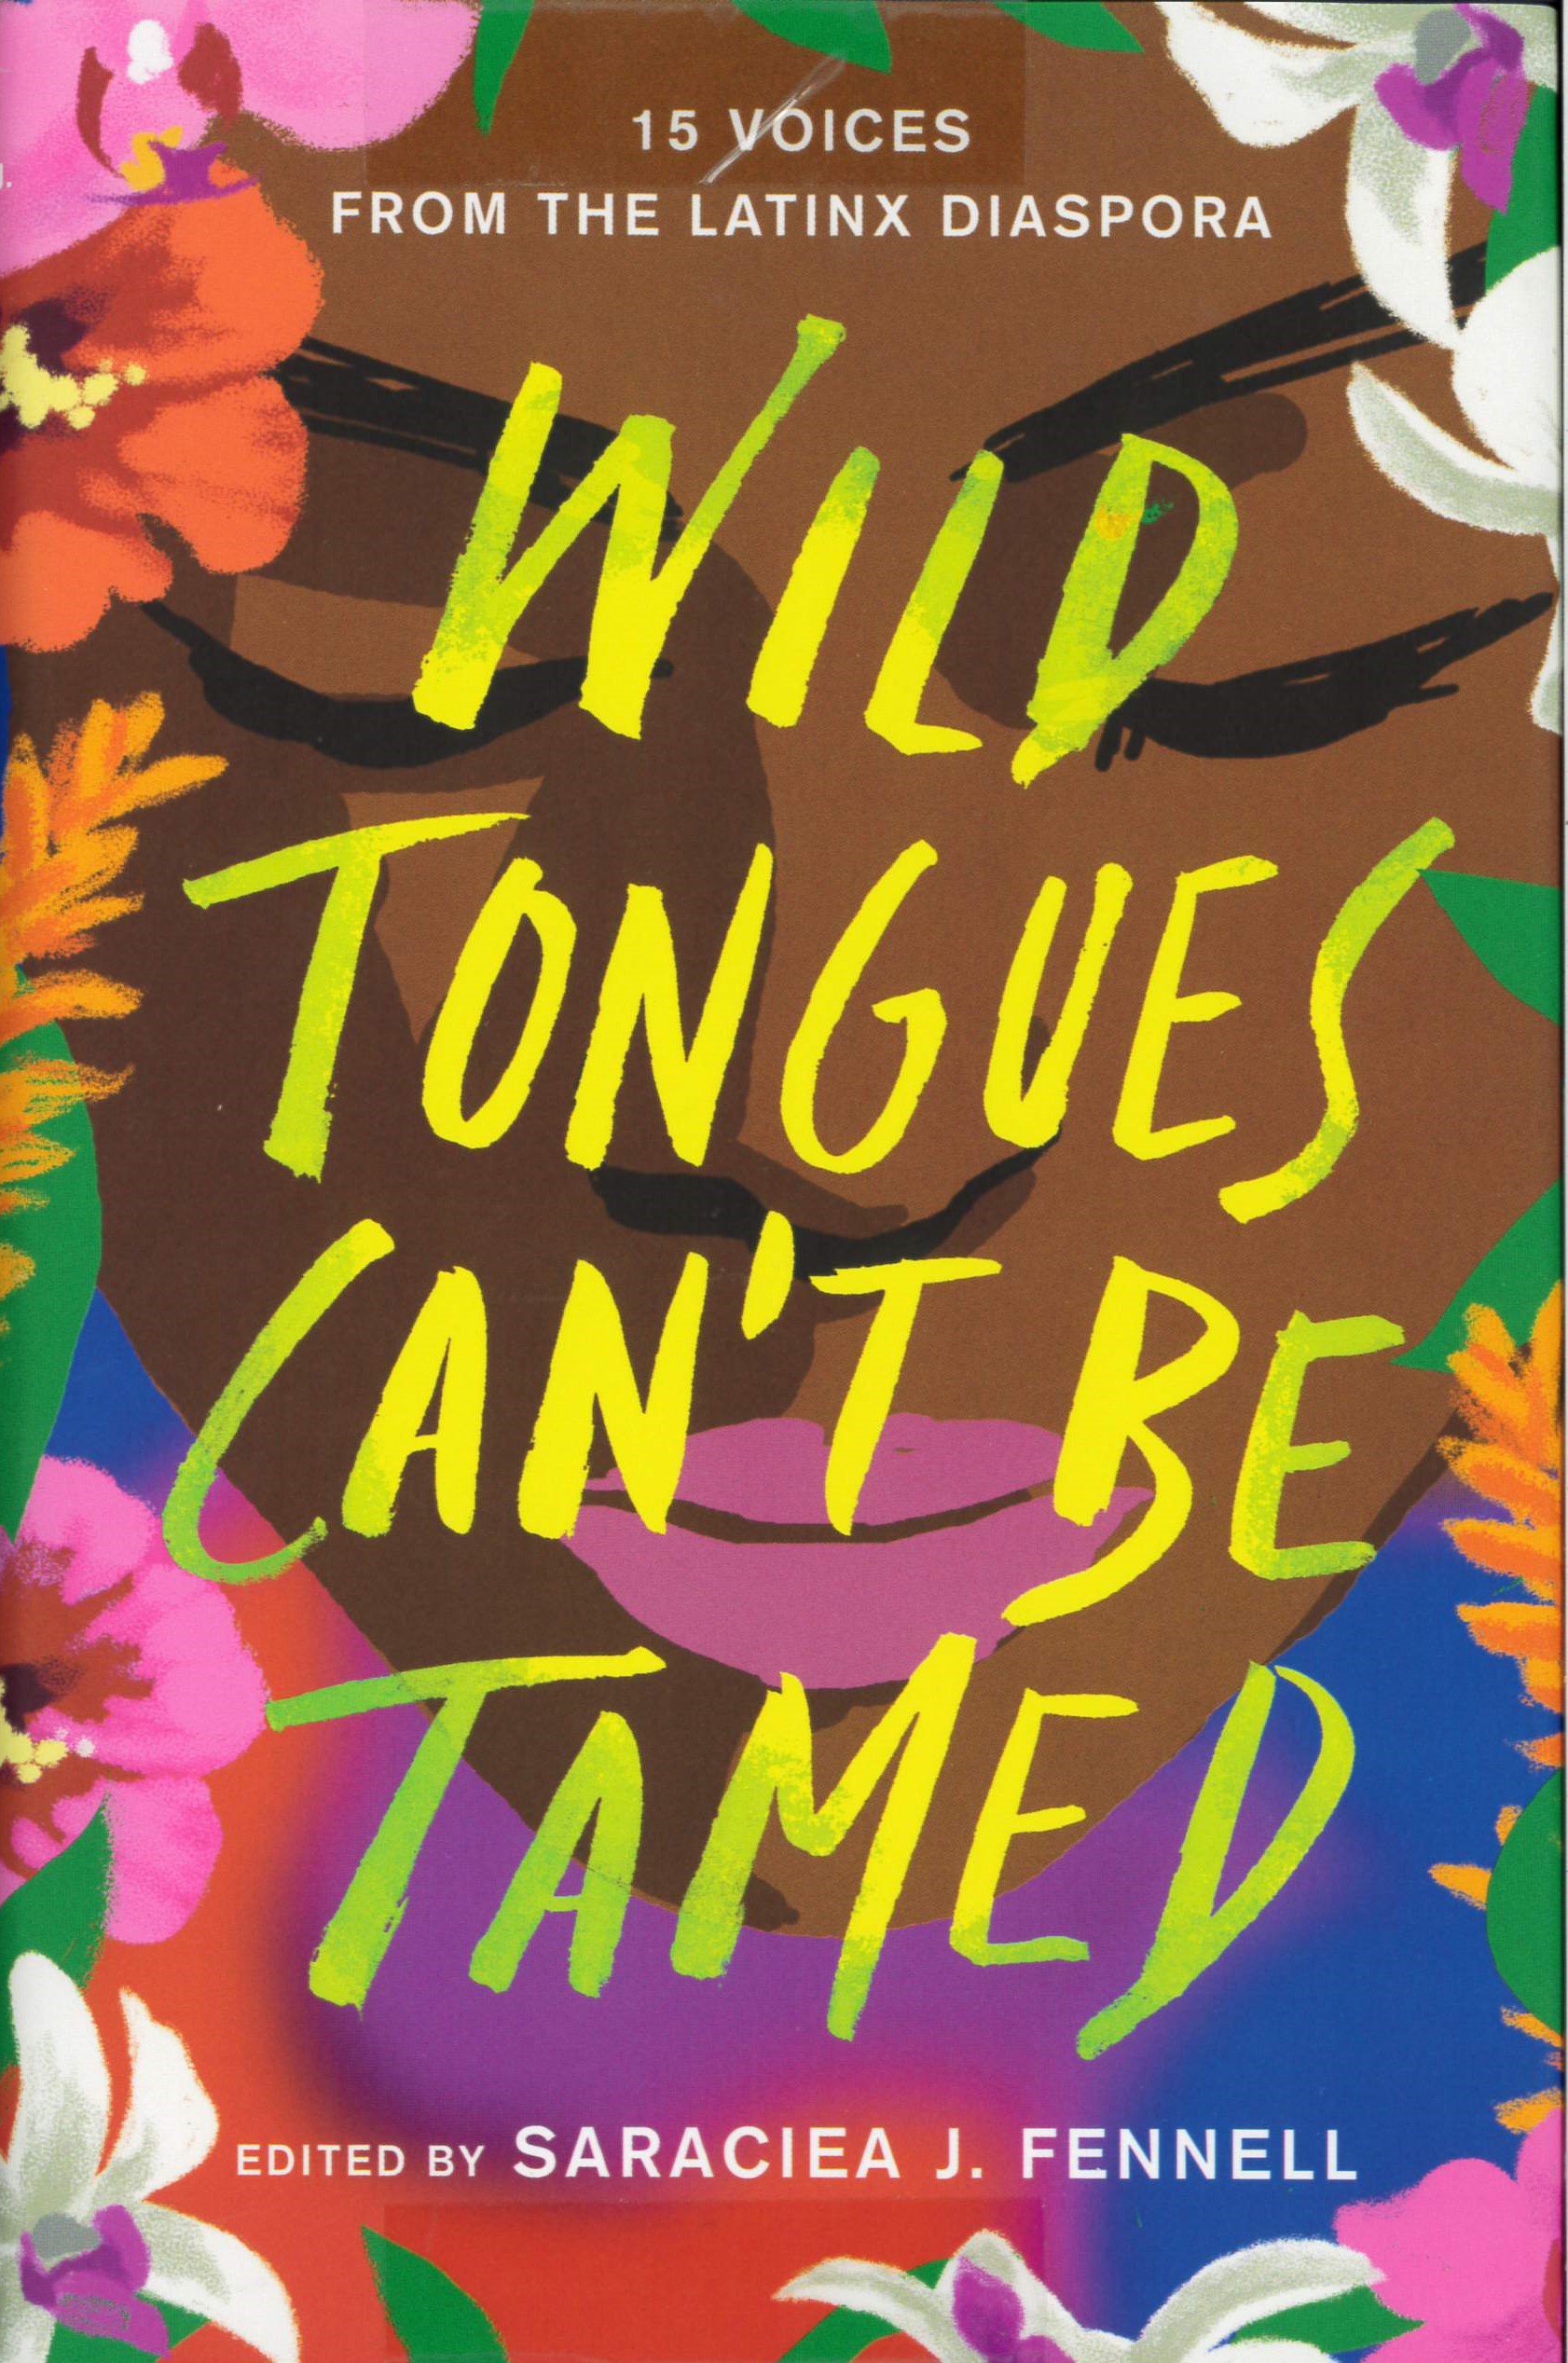 Wild tongues can